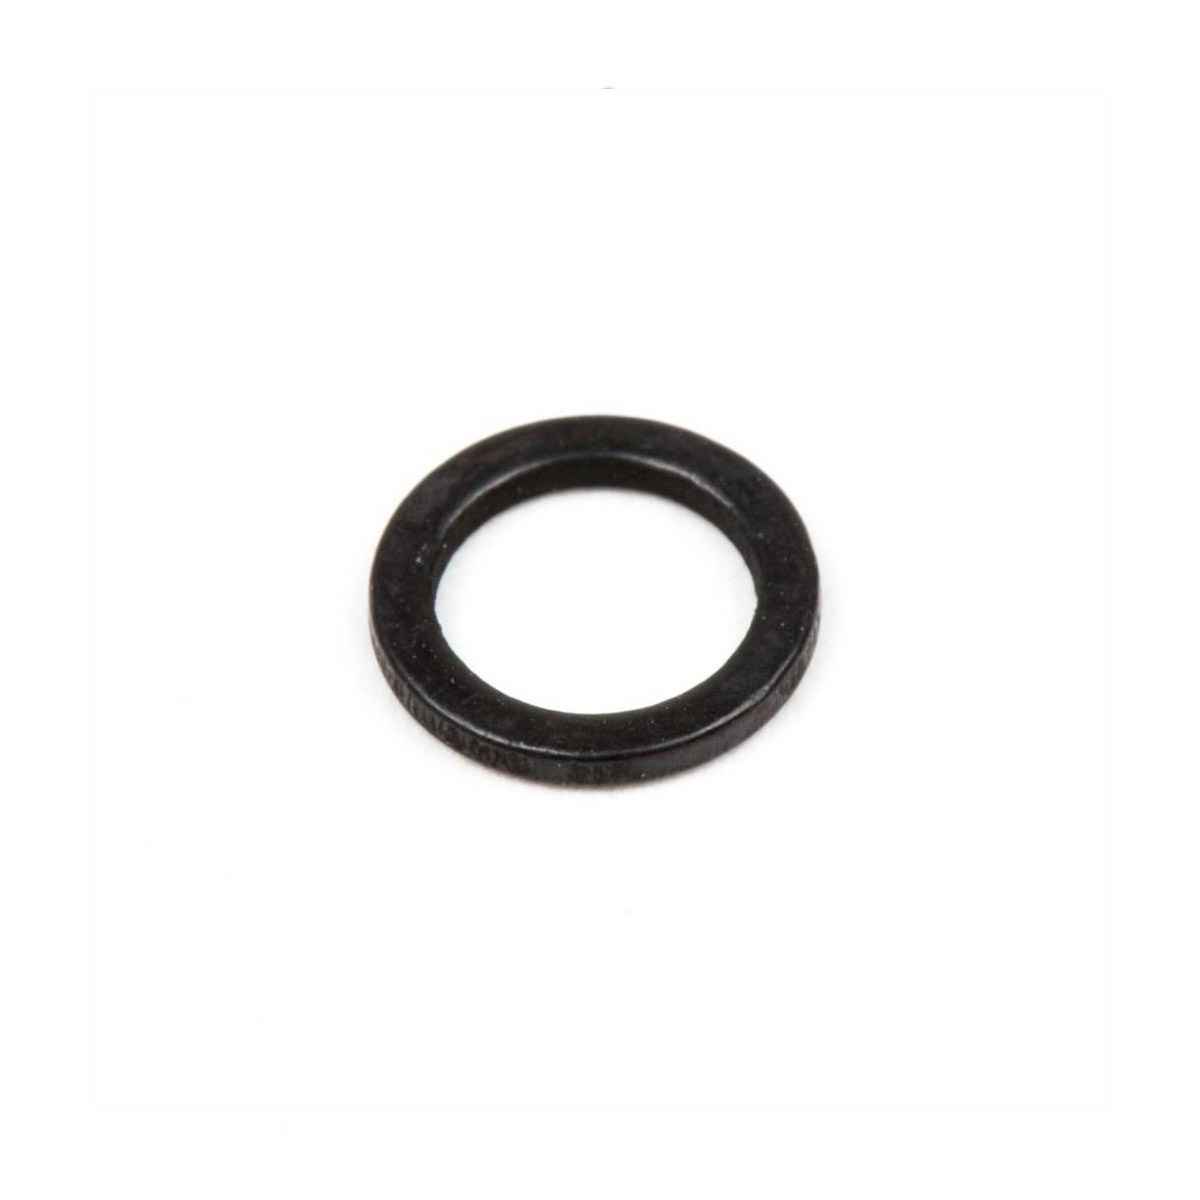 Rig Solutions Black Coated Rig Rings Small